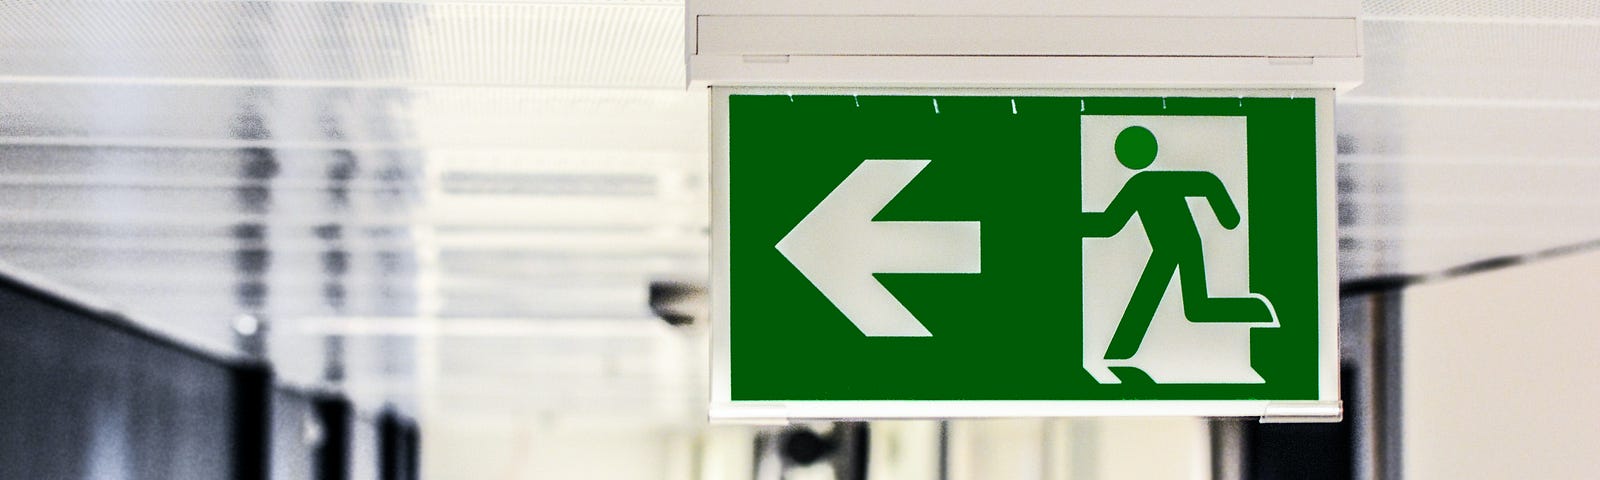 An image of an exit sign, pointing to the left of the image.